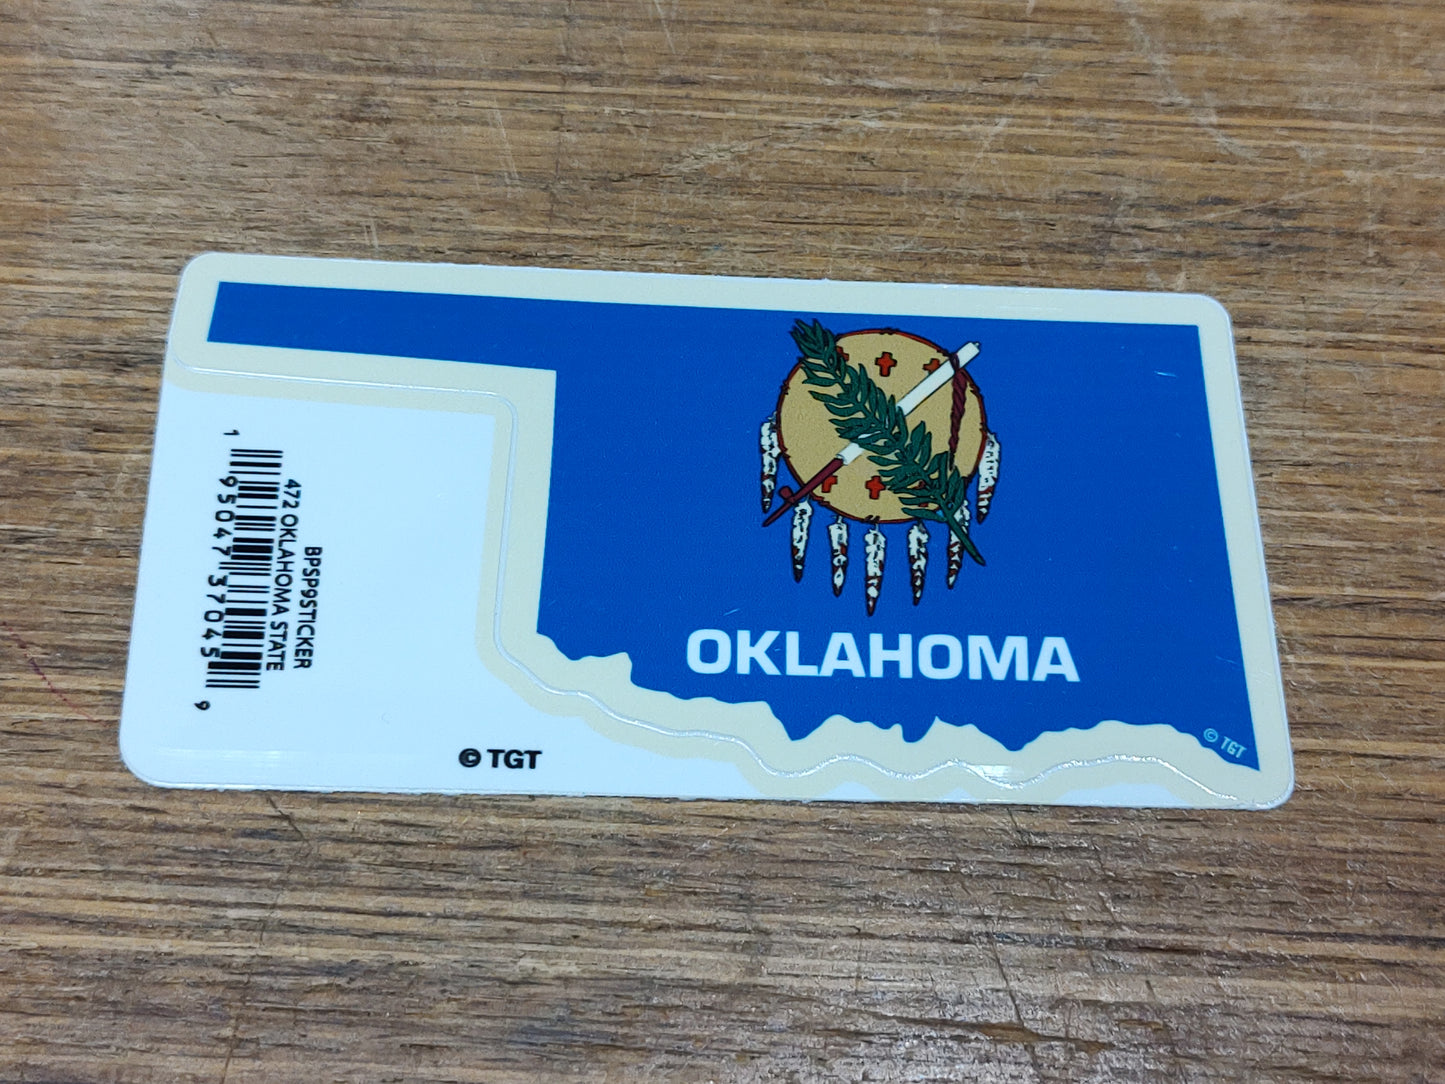 Oklahoma State with Seal - sticker